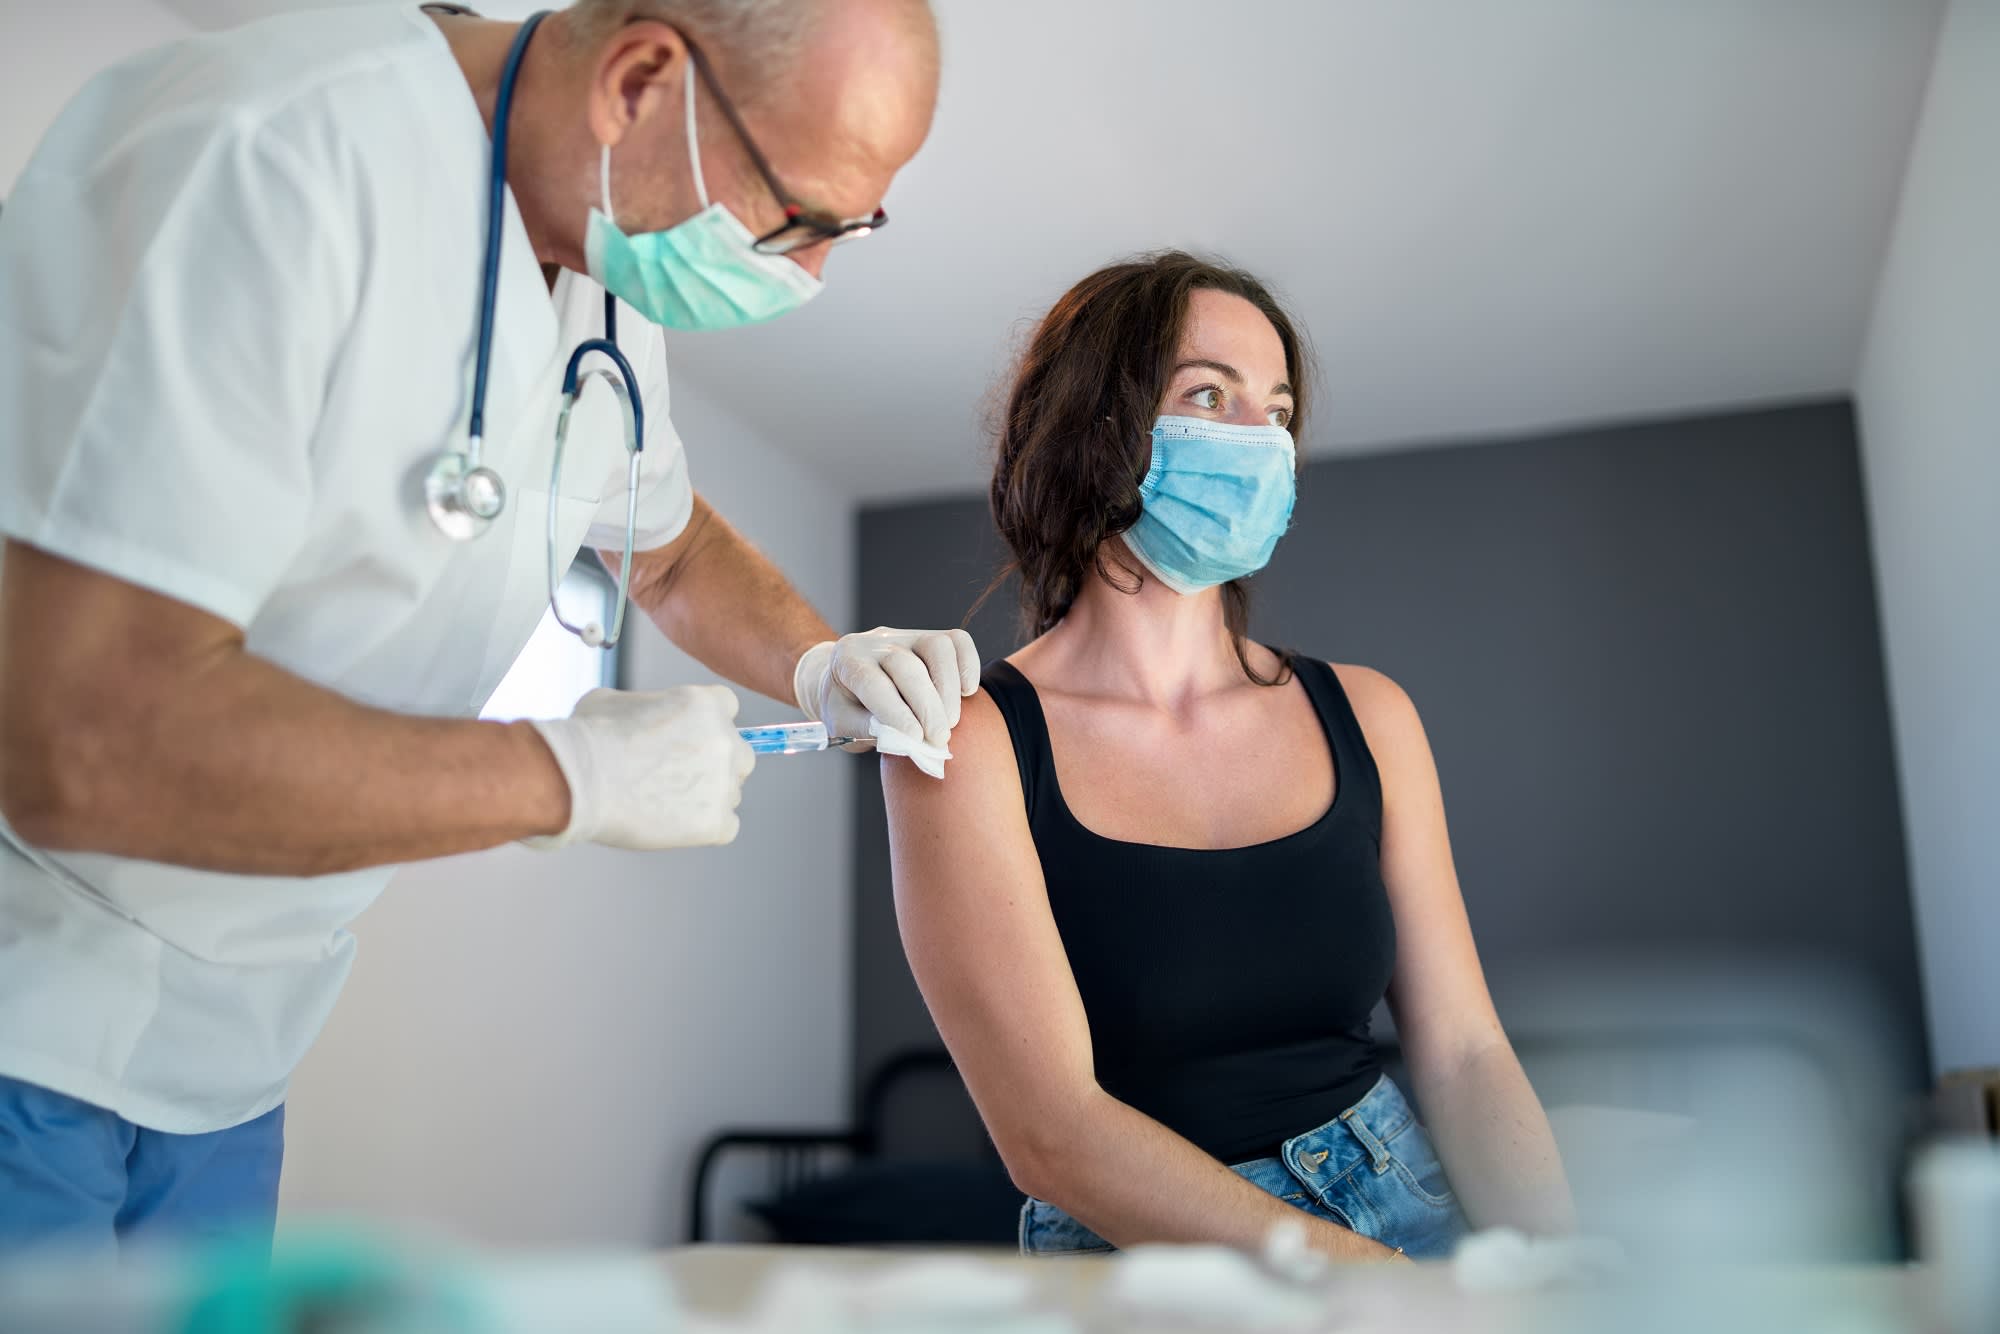 Can your employer make you get a Covid vaccine? Here's what experts say